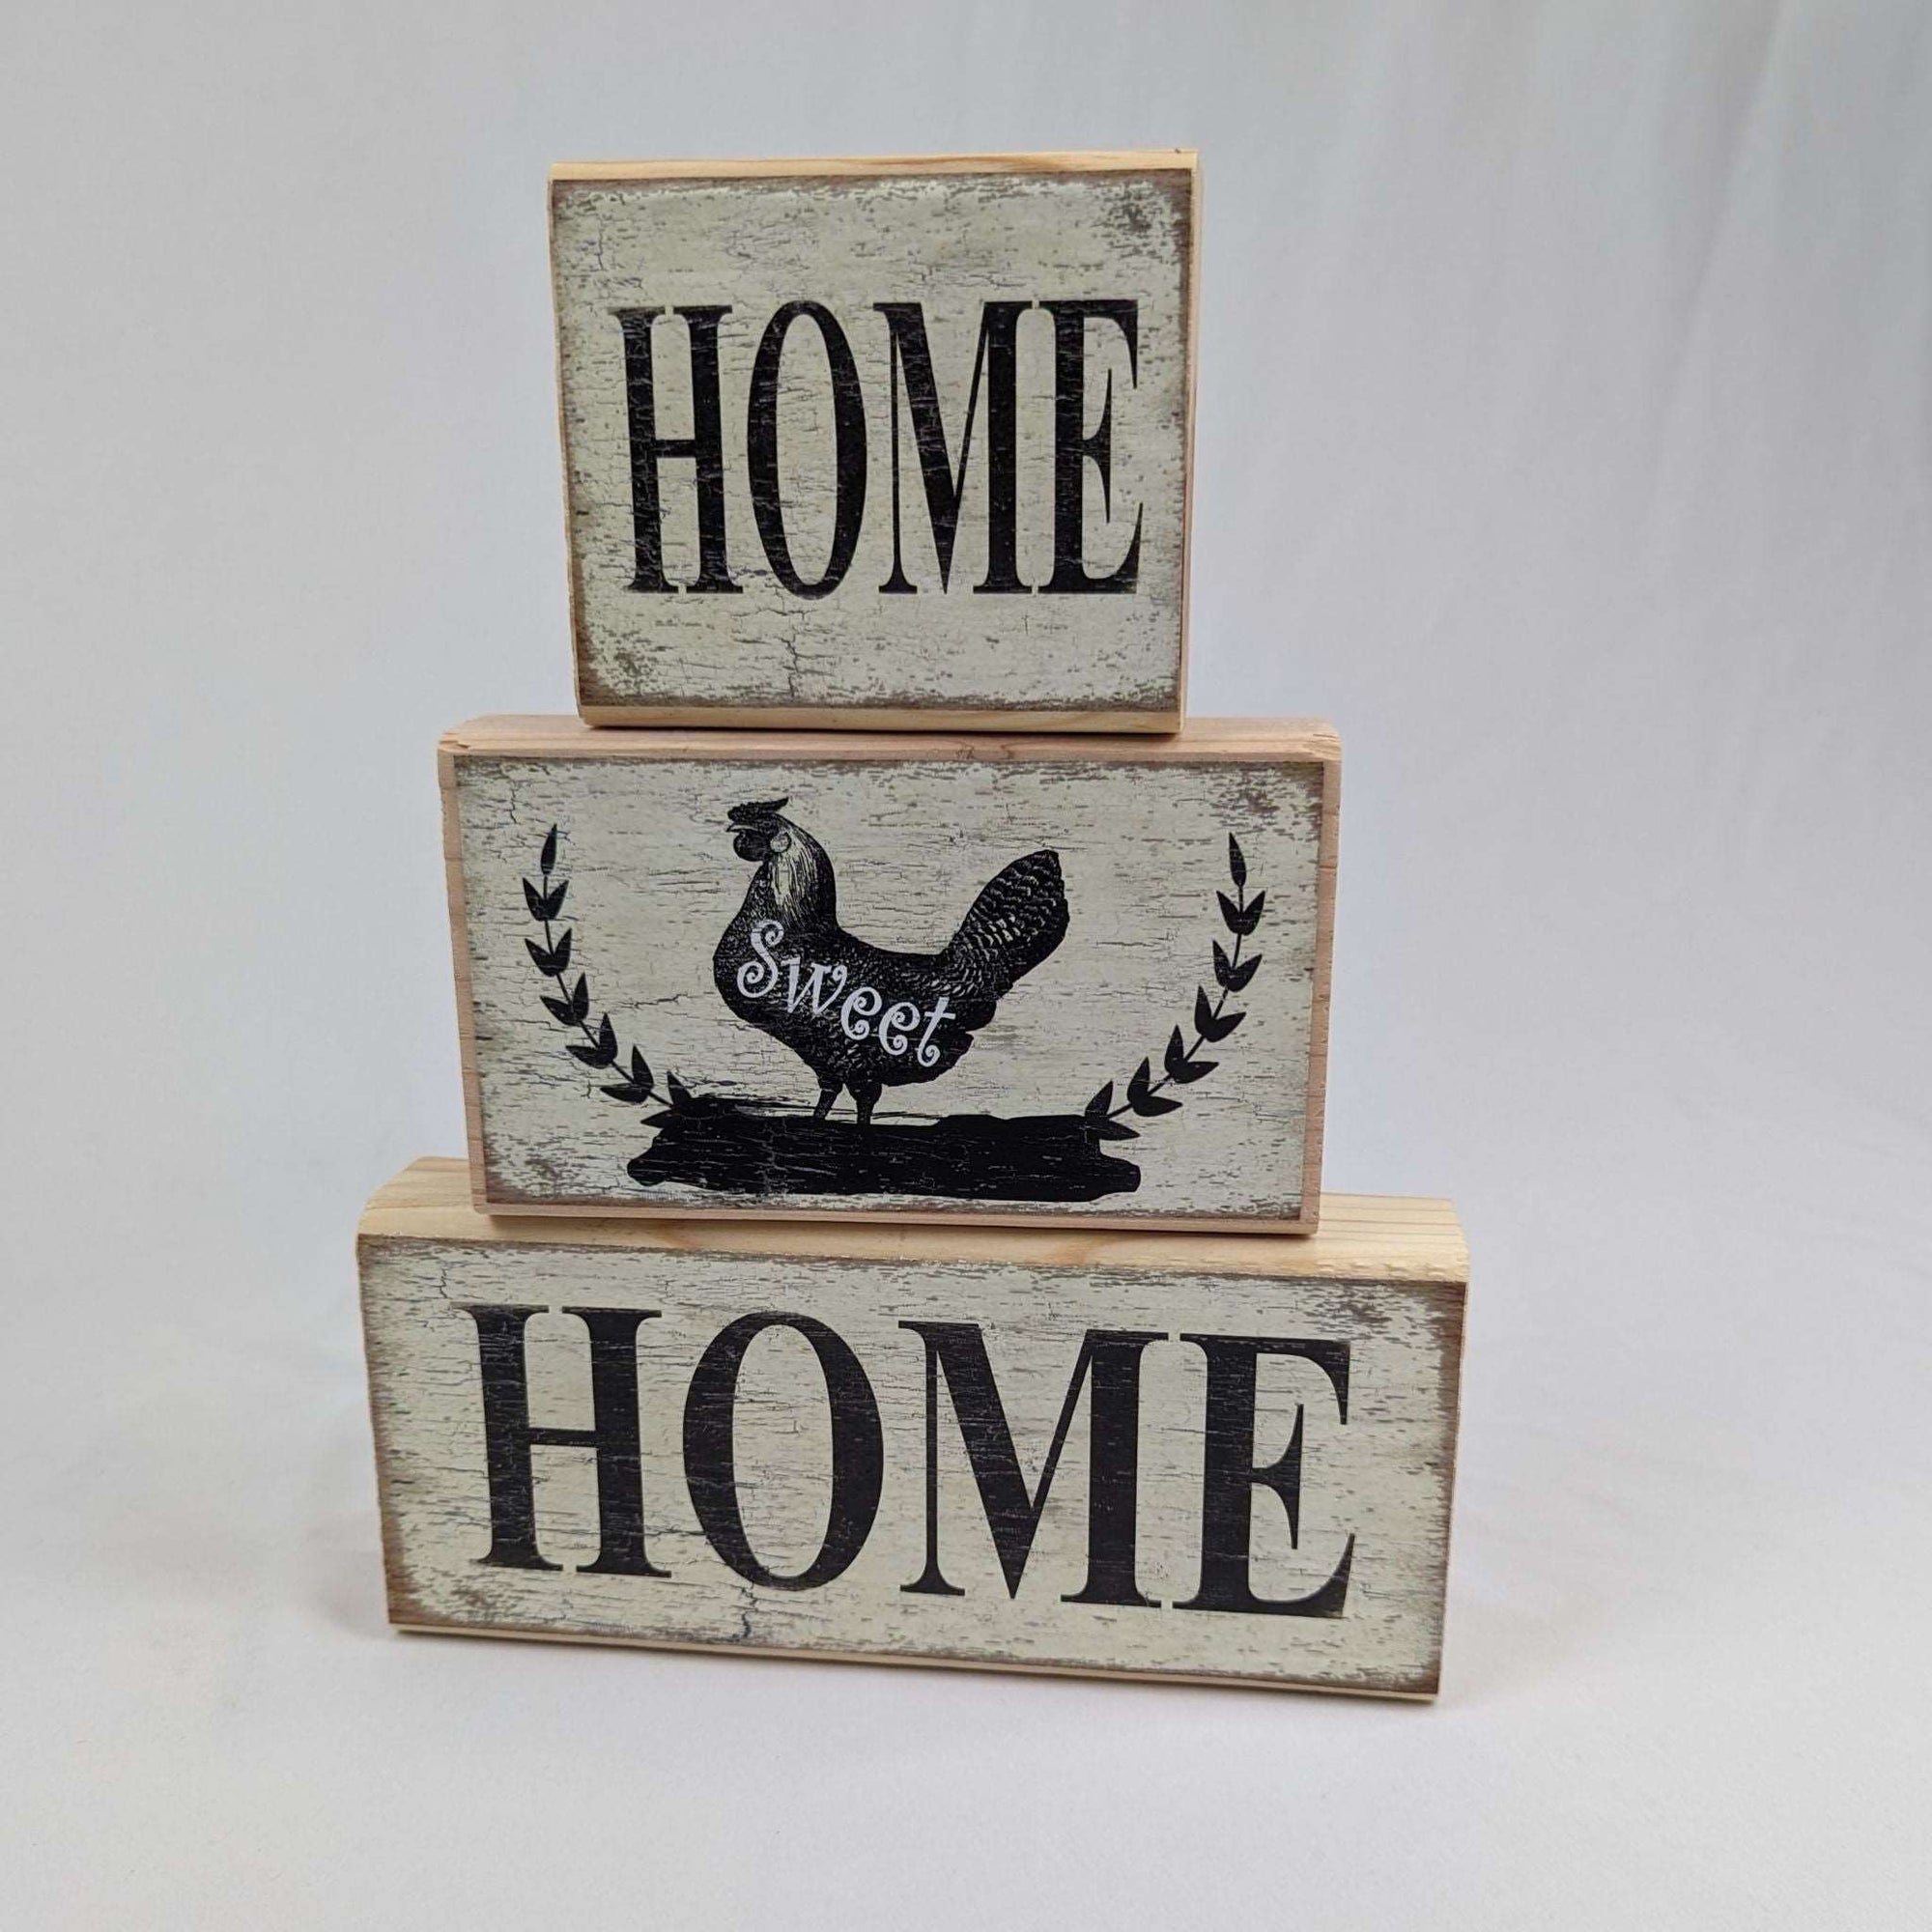 Home Sweet Home Chicken Blocks - Cluck It All Farms